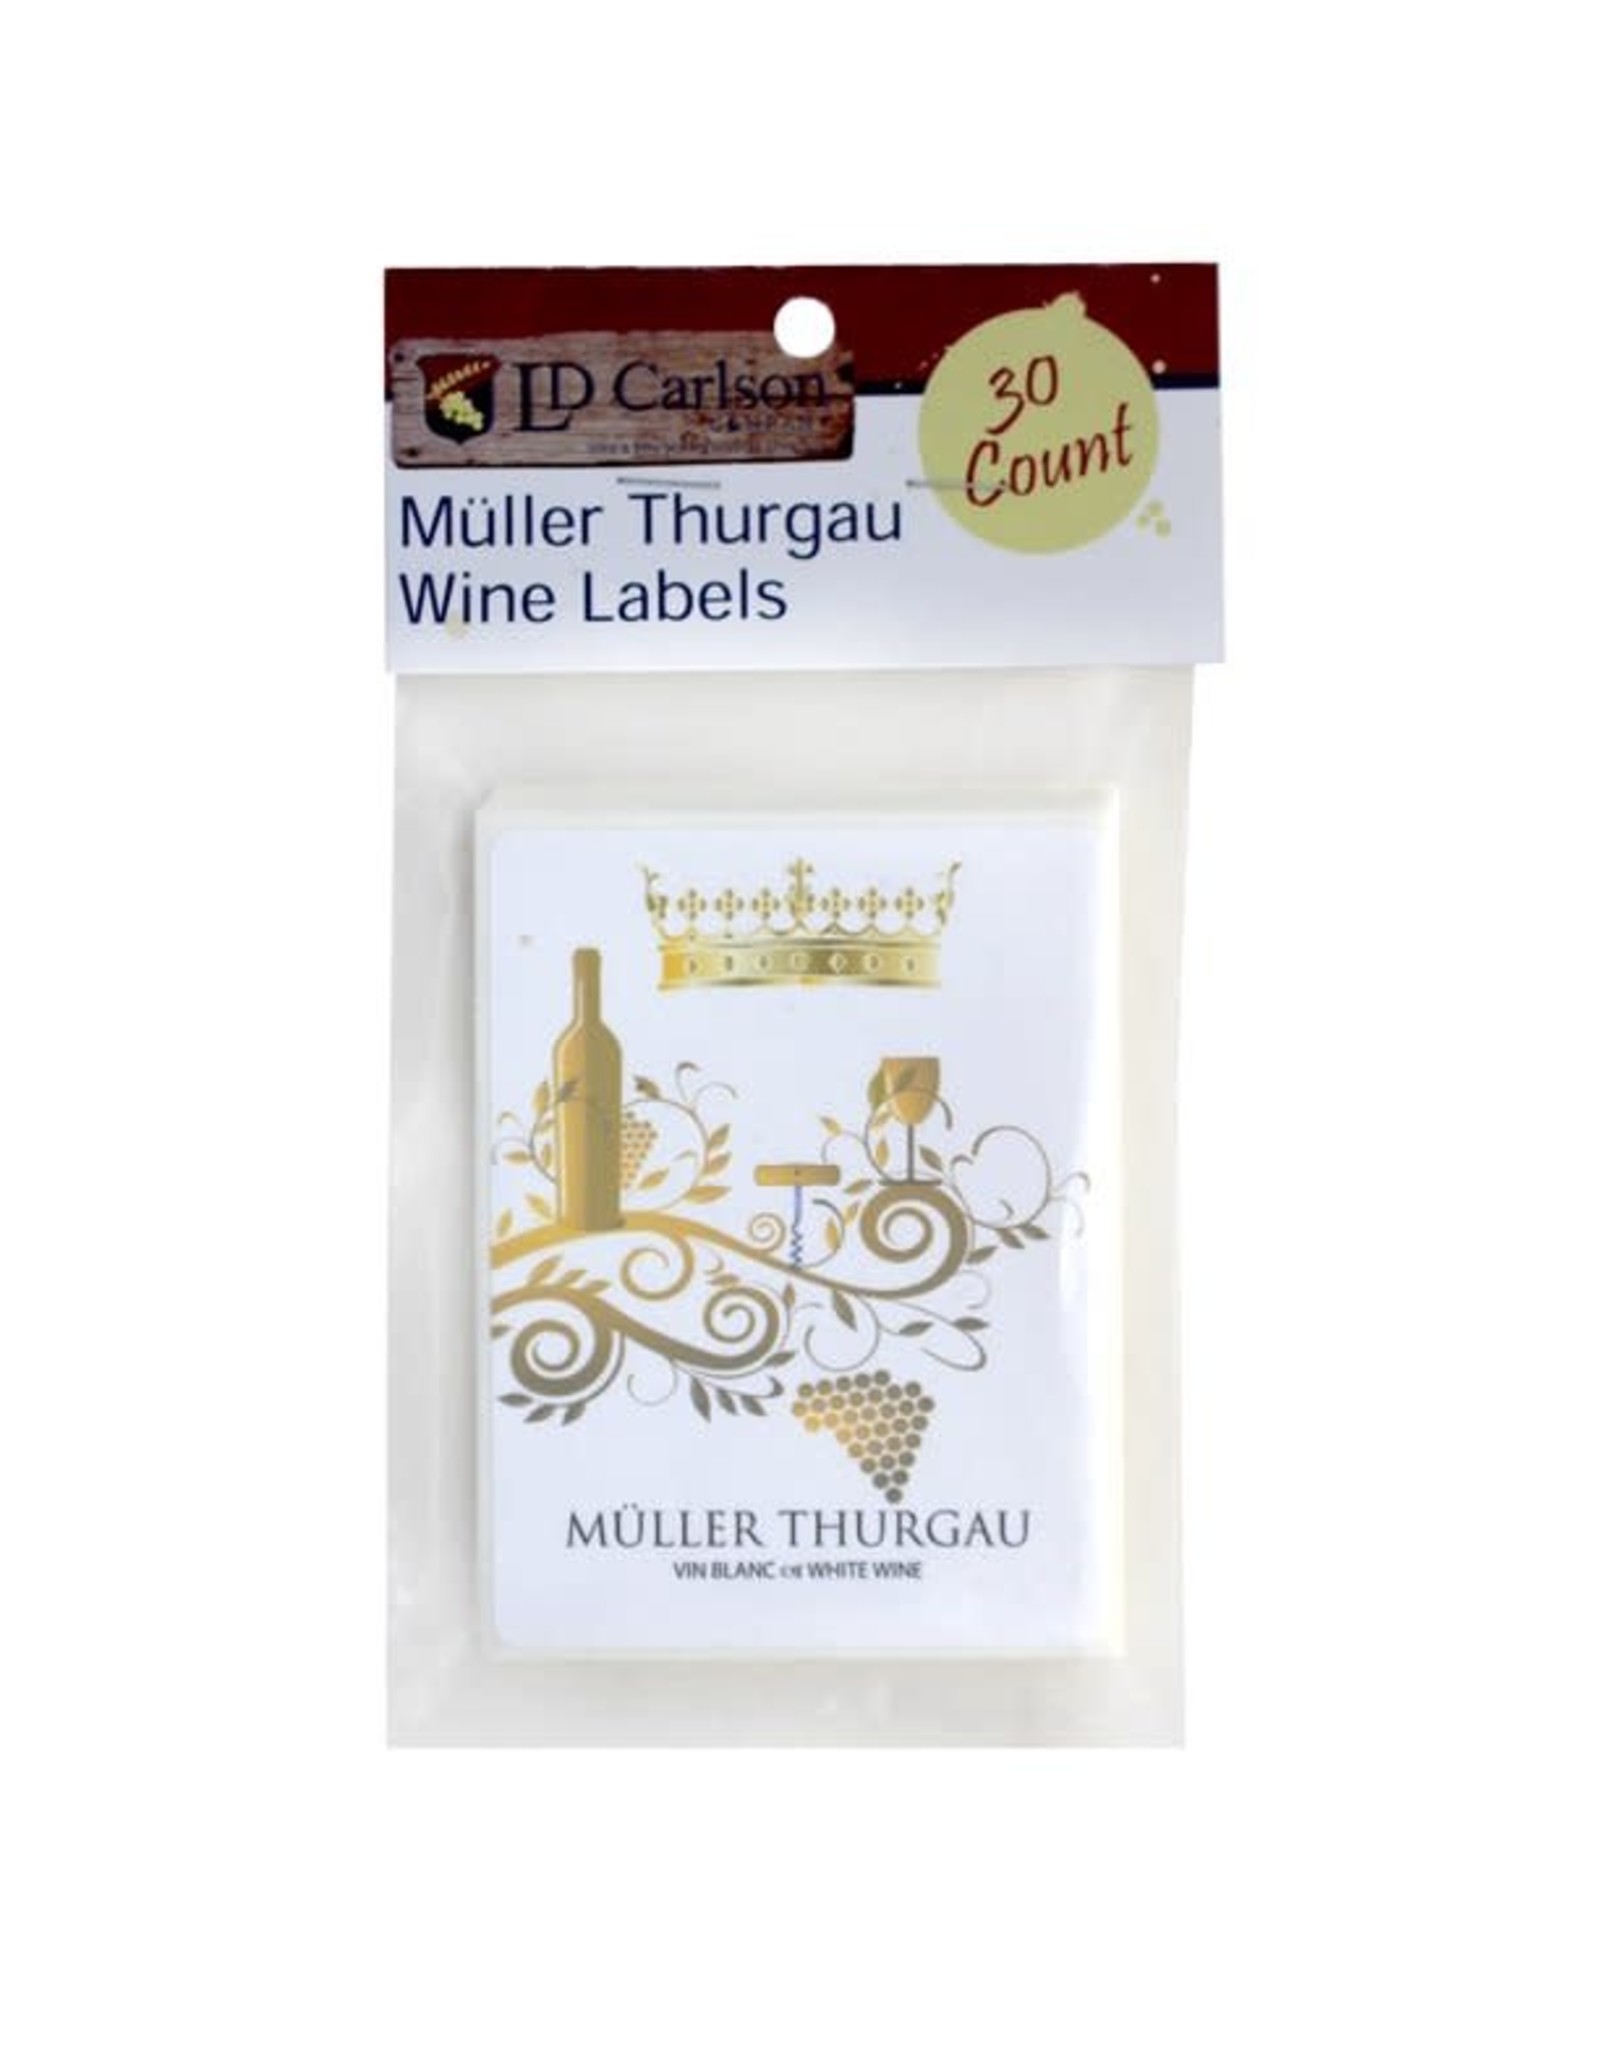 LD Carlson Muller Thurgau 30 ct Wine Labels